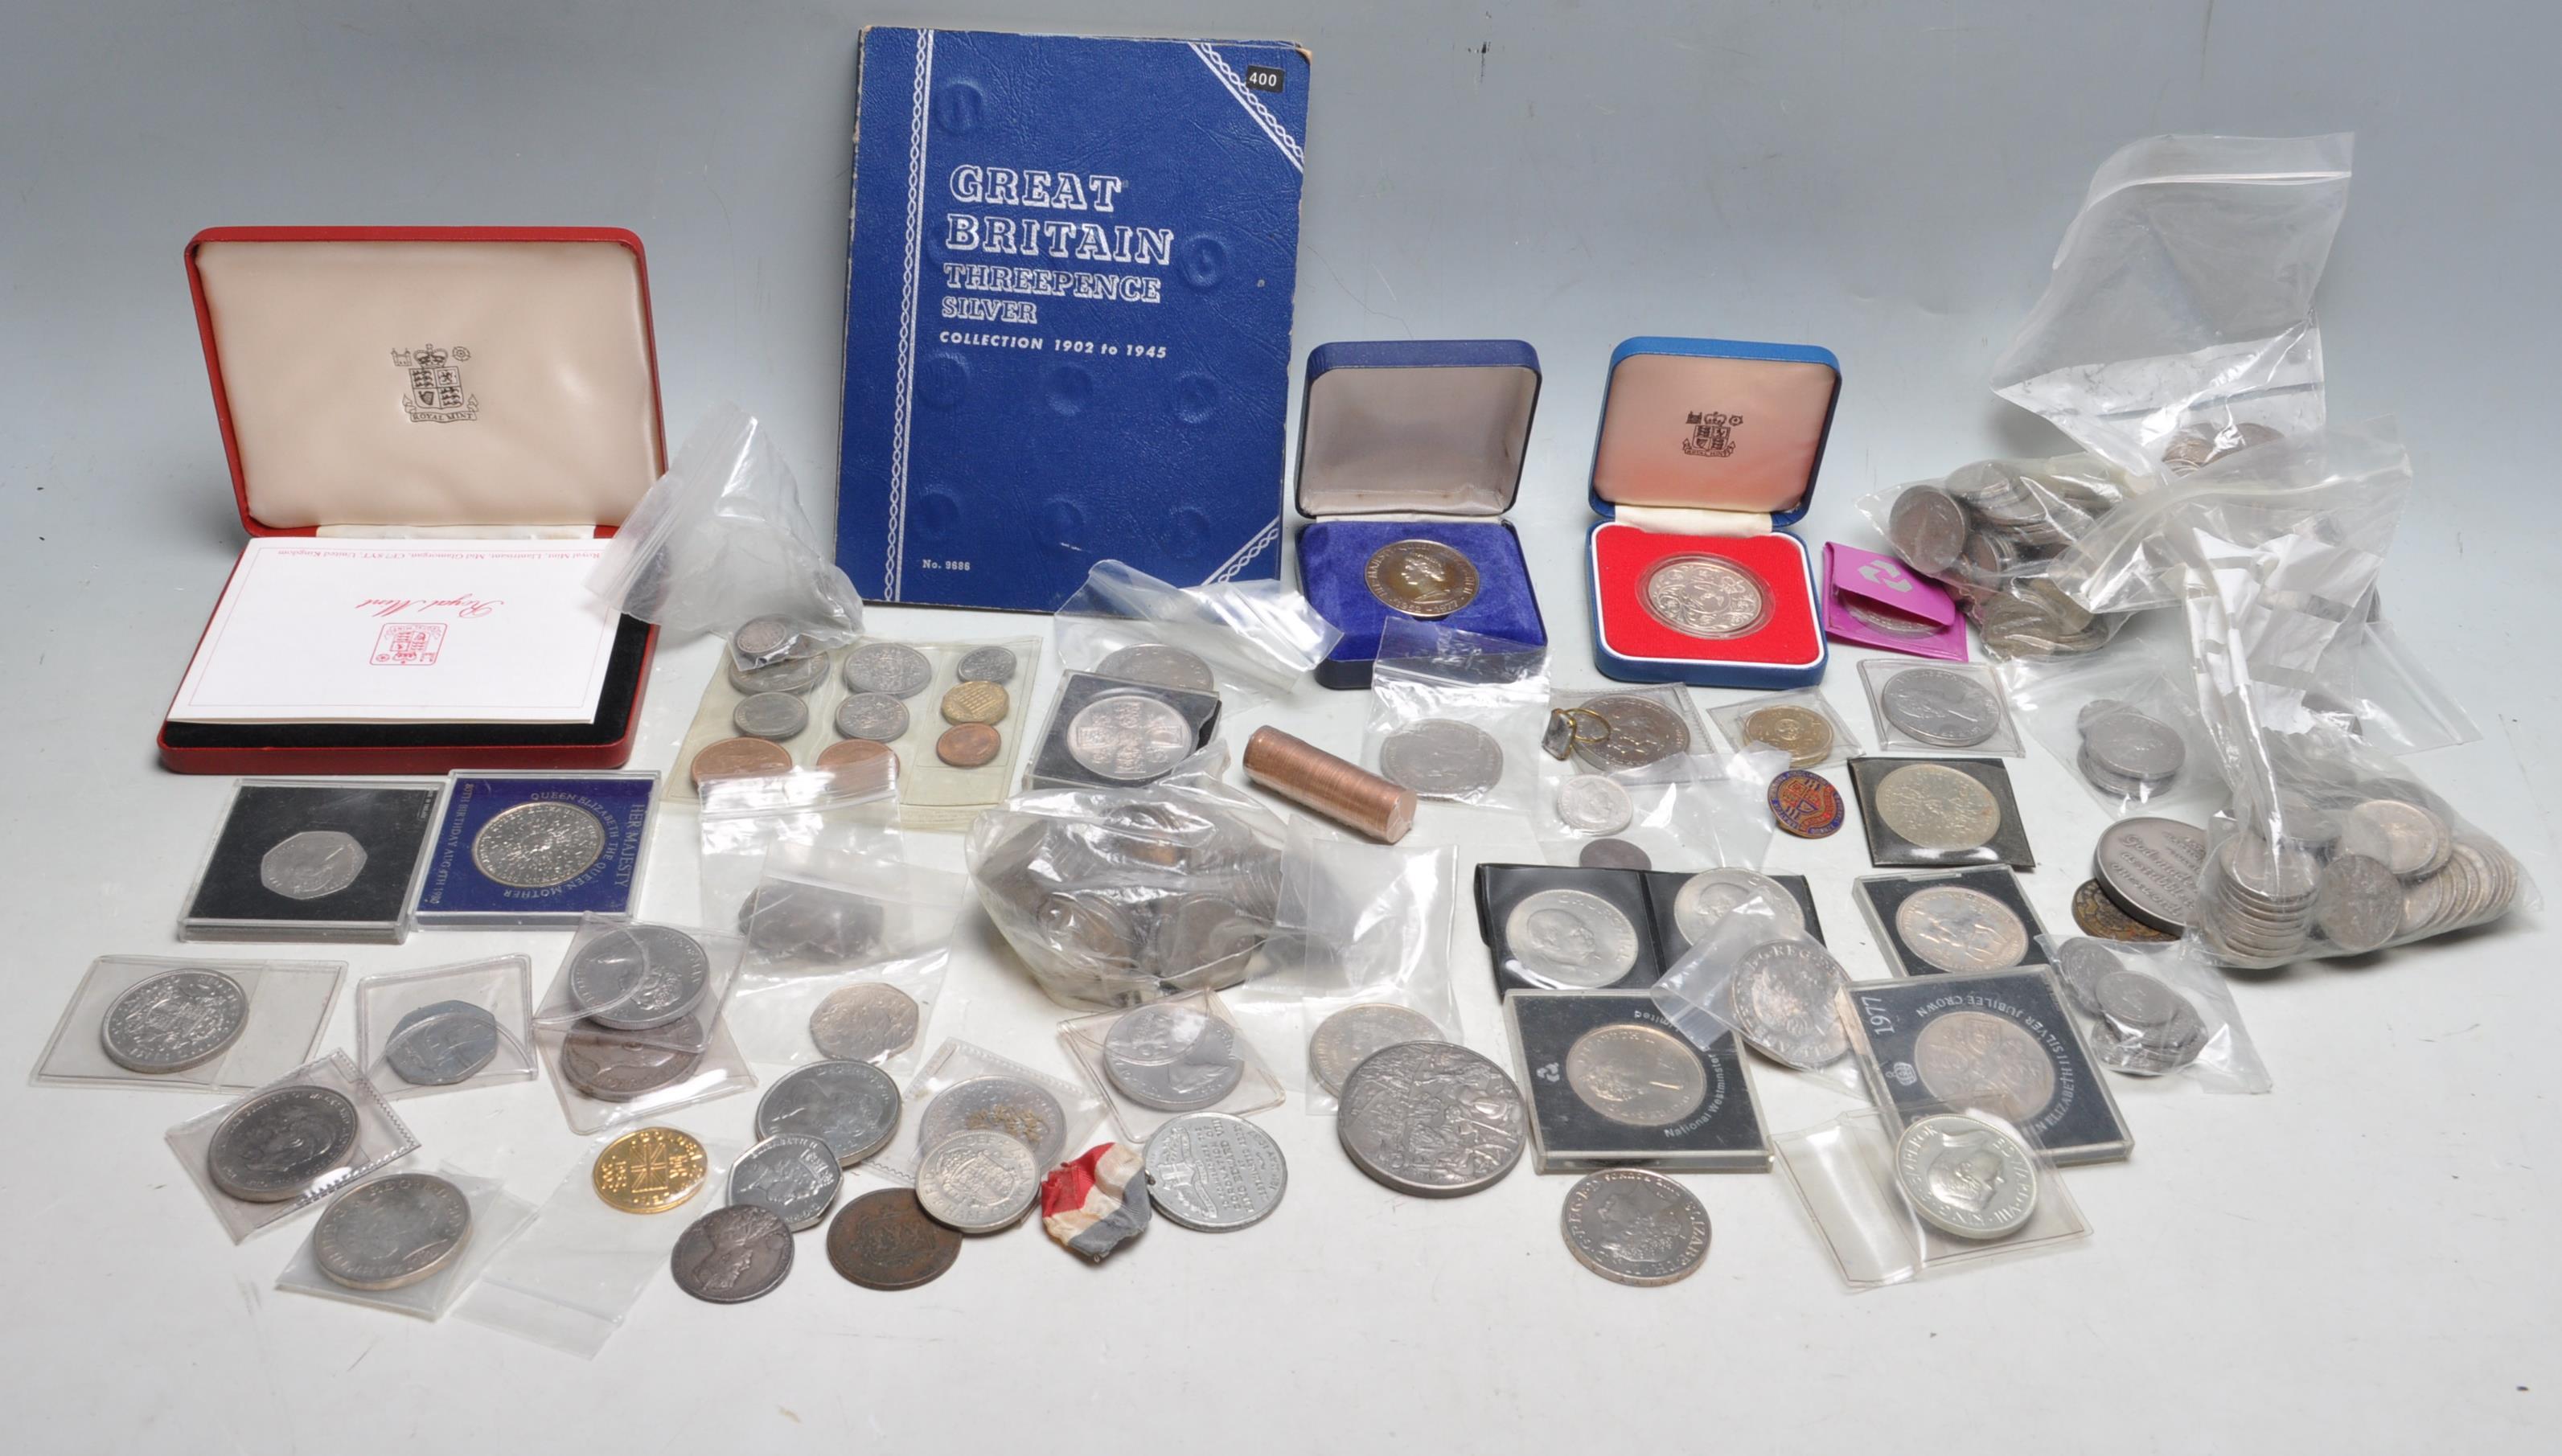 LARGE COLLECTION OF 20TH CENTURY UK CURRENCY AND COMMORATIVE COINS